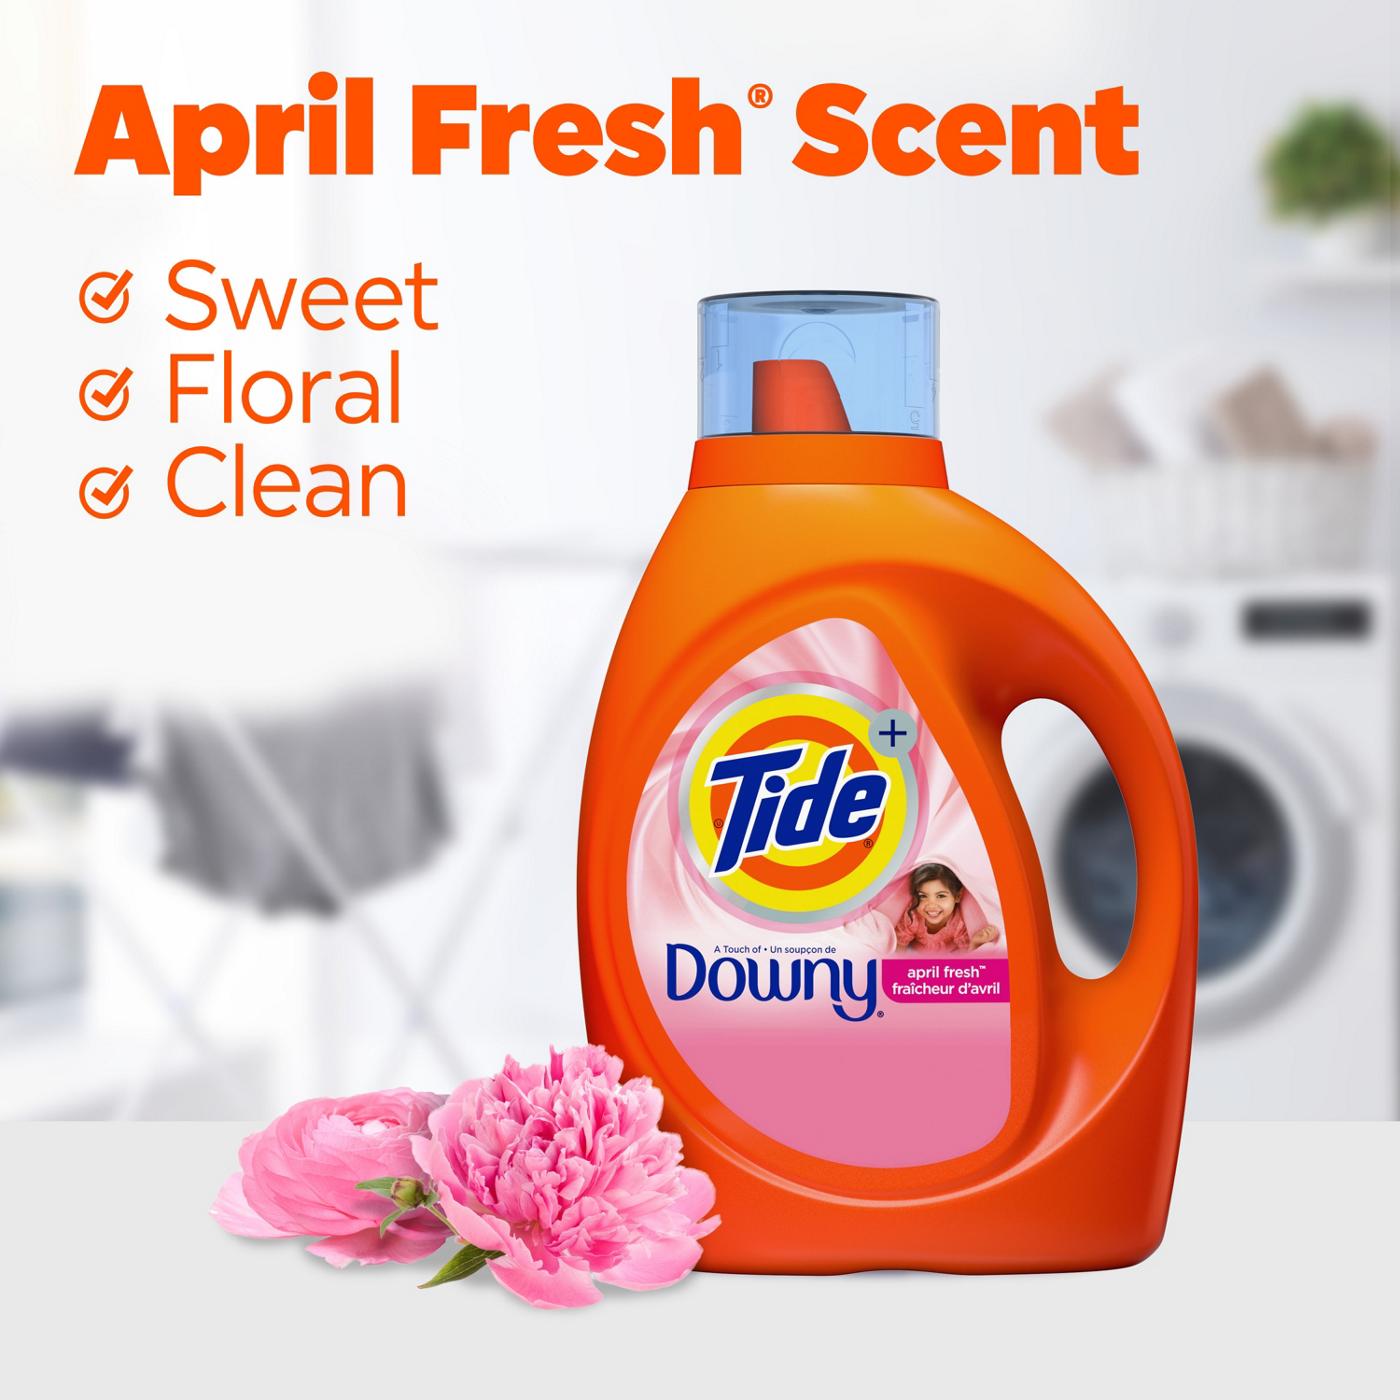 Tide + Downy HE Turbo Clean Liquid Laundry Detergent, 29 Loads - April Fresh; image 7 of 12